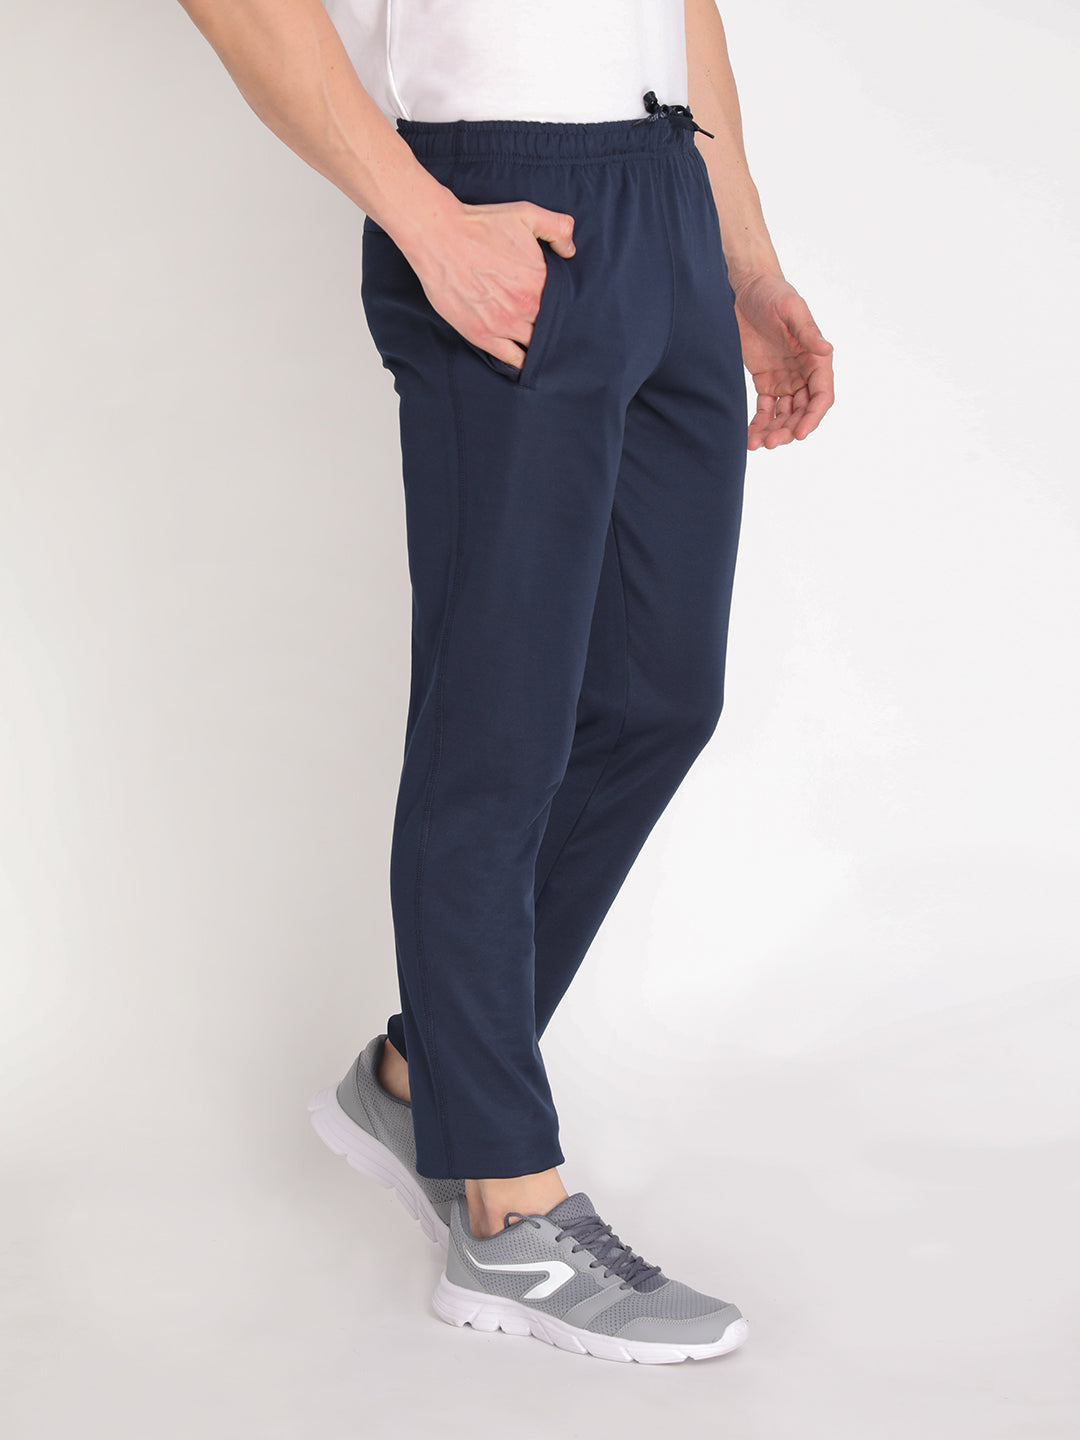 Neva Men's Trackpant with Sweat Free Fabric Material- Navy